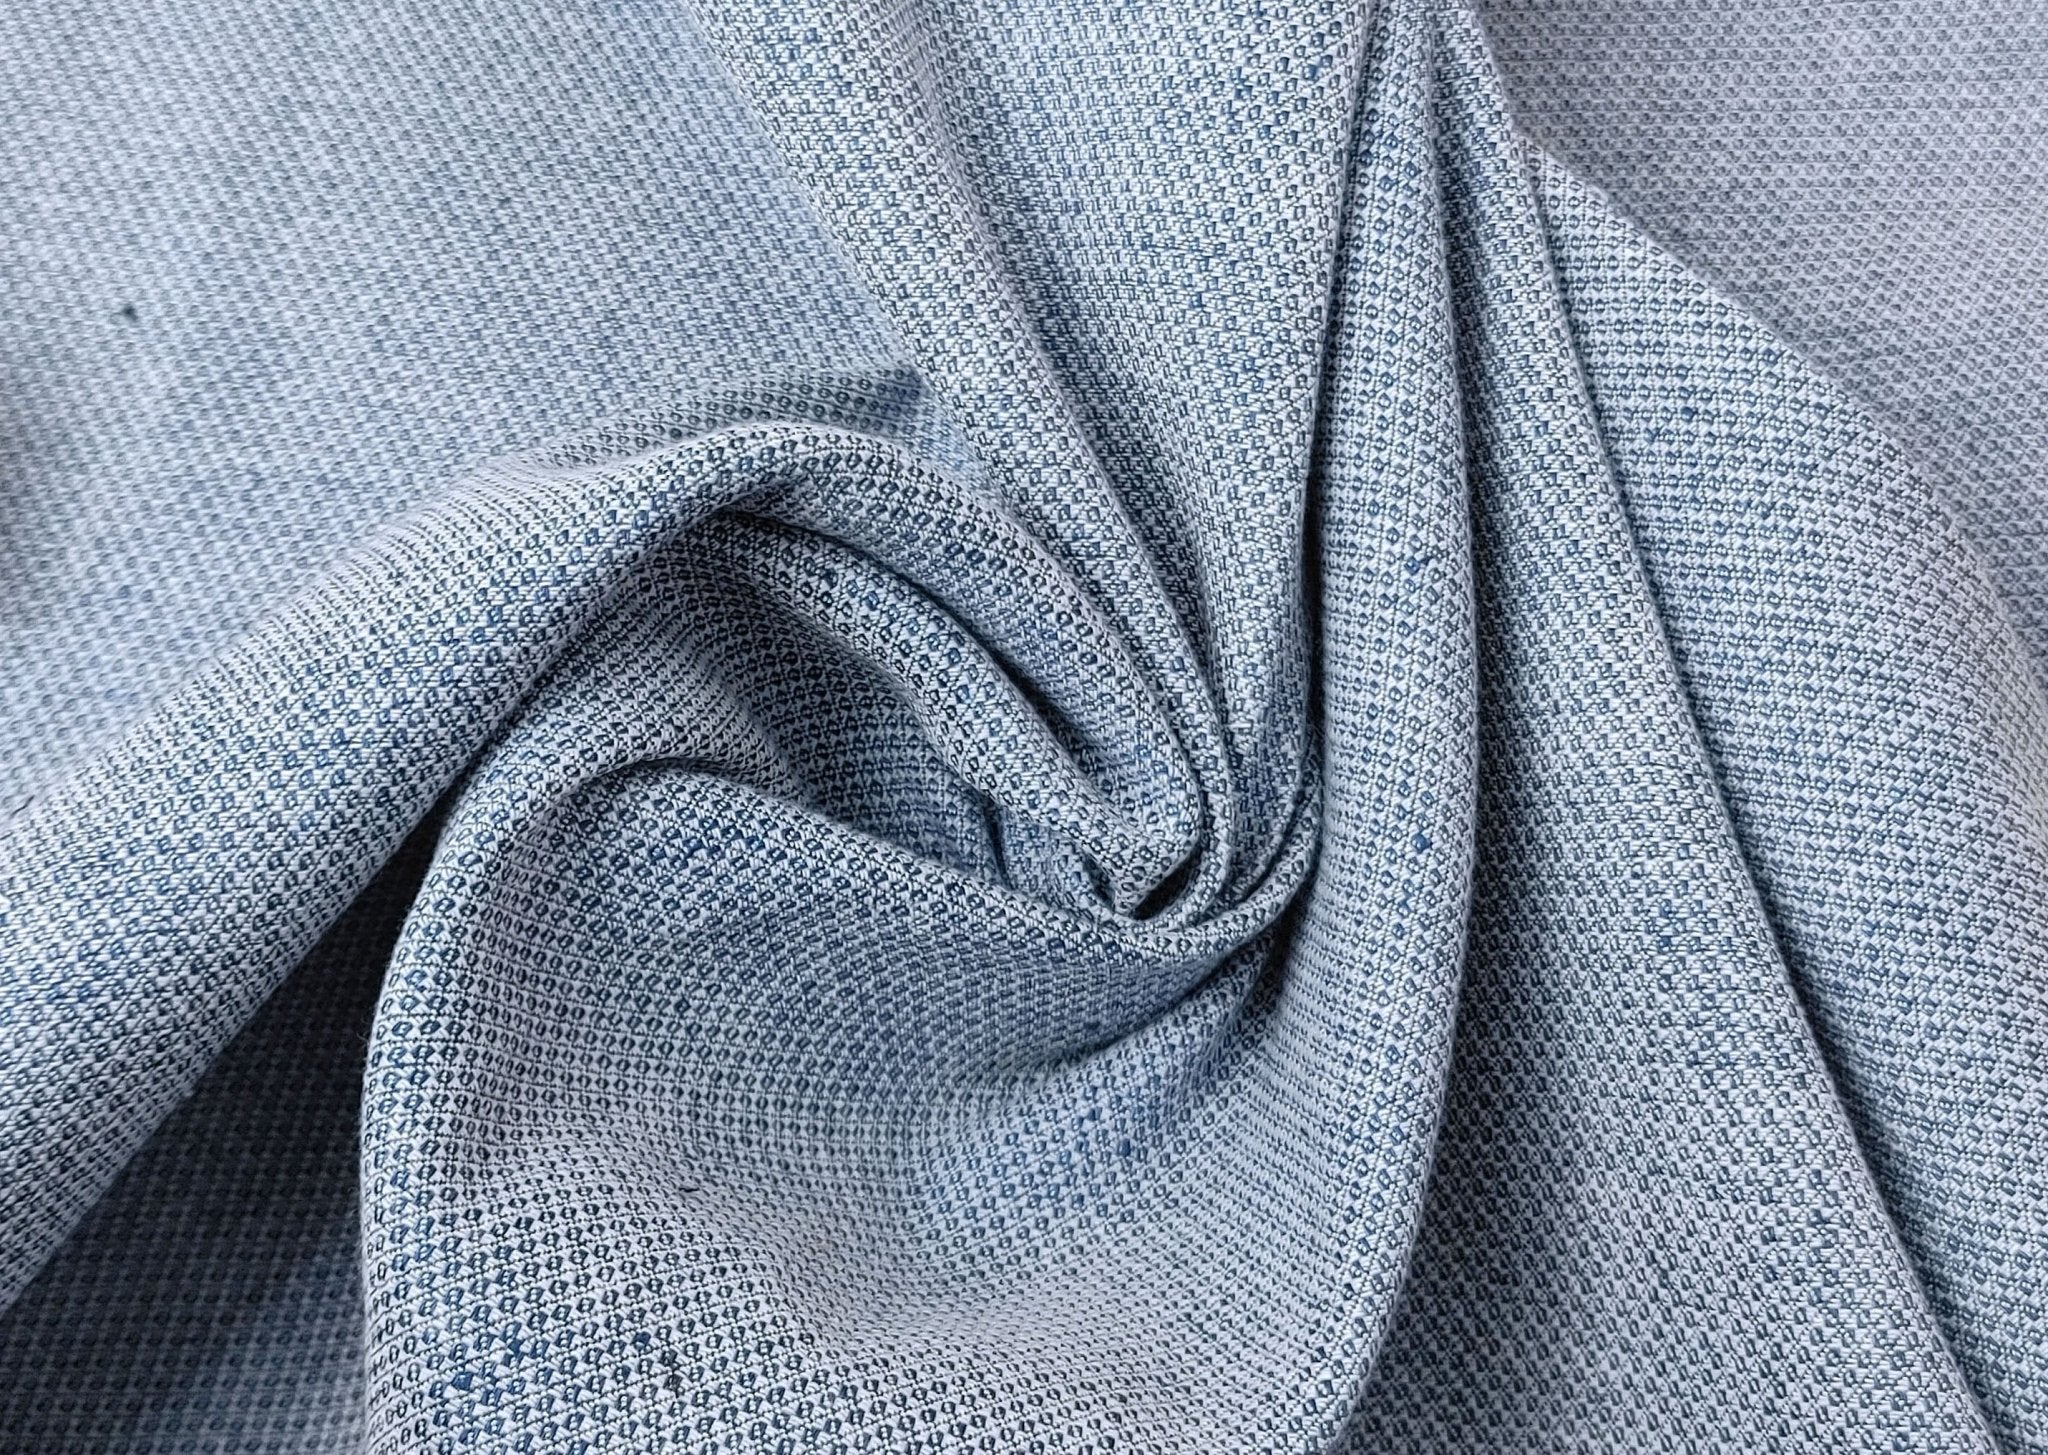 Chambray cotton with herringbone pattern - blue